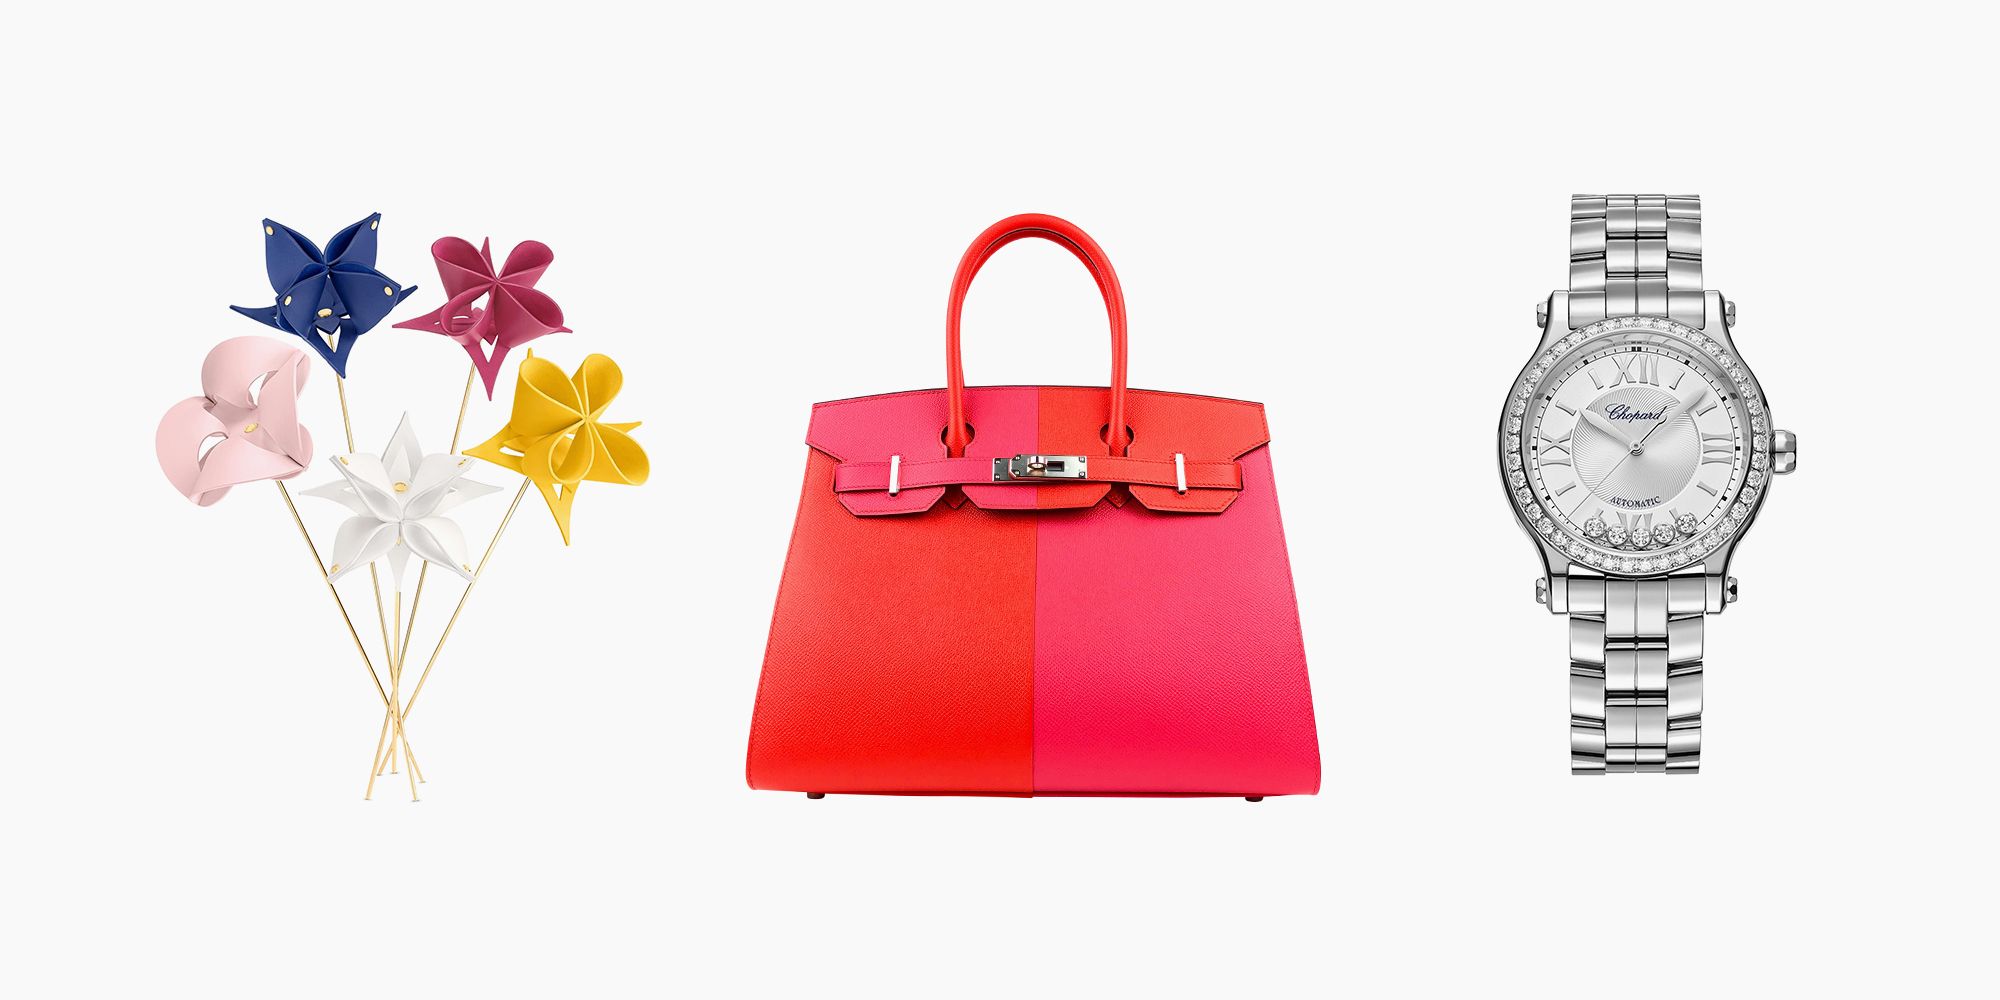 Mother's Day gift guide 2023: Find amazing purses, jewelry and